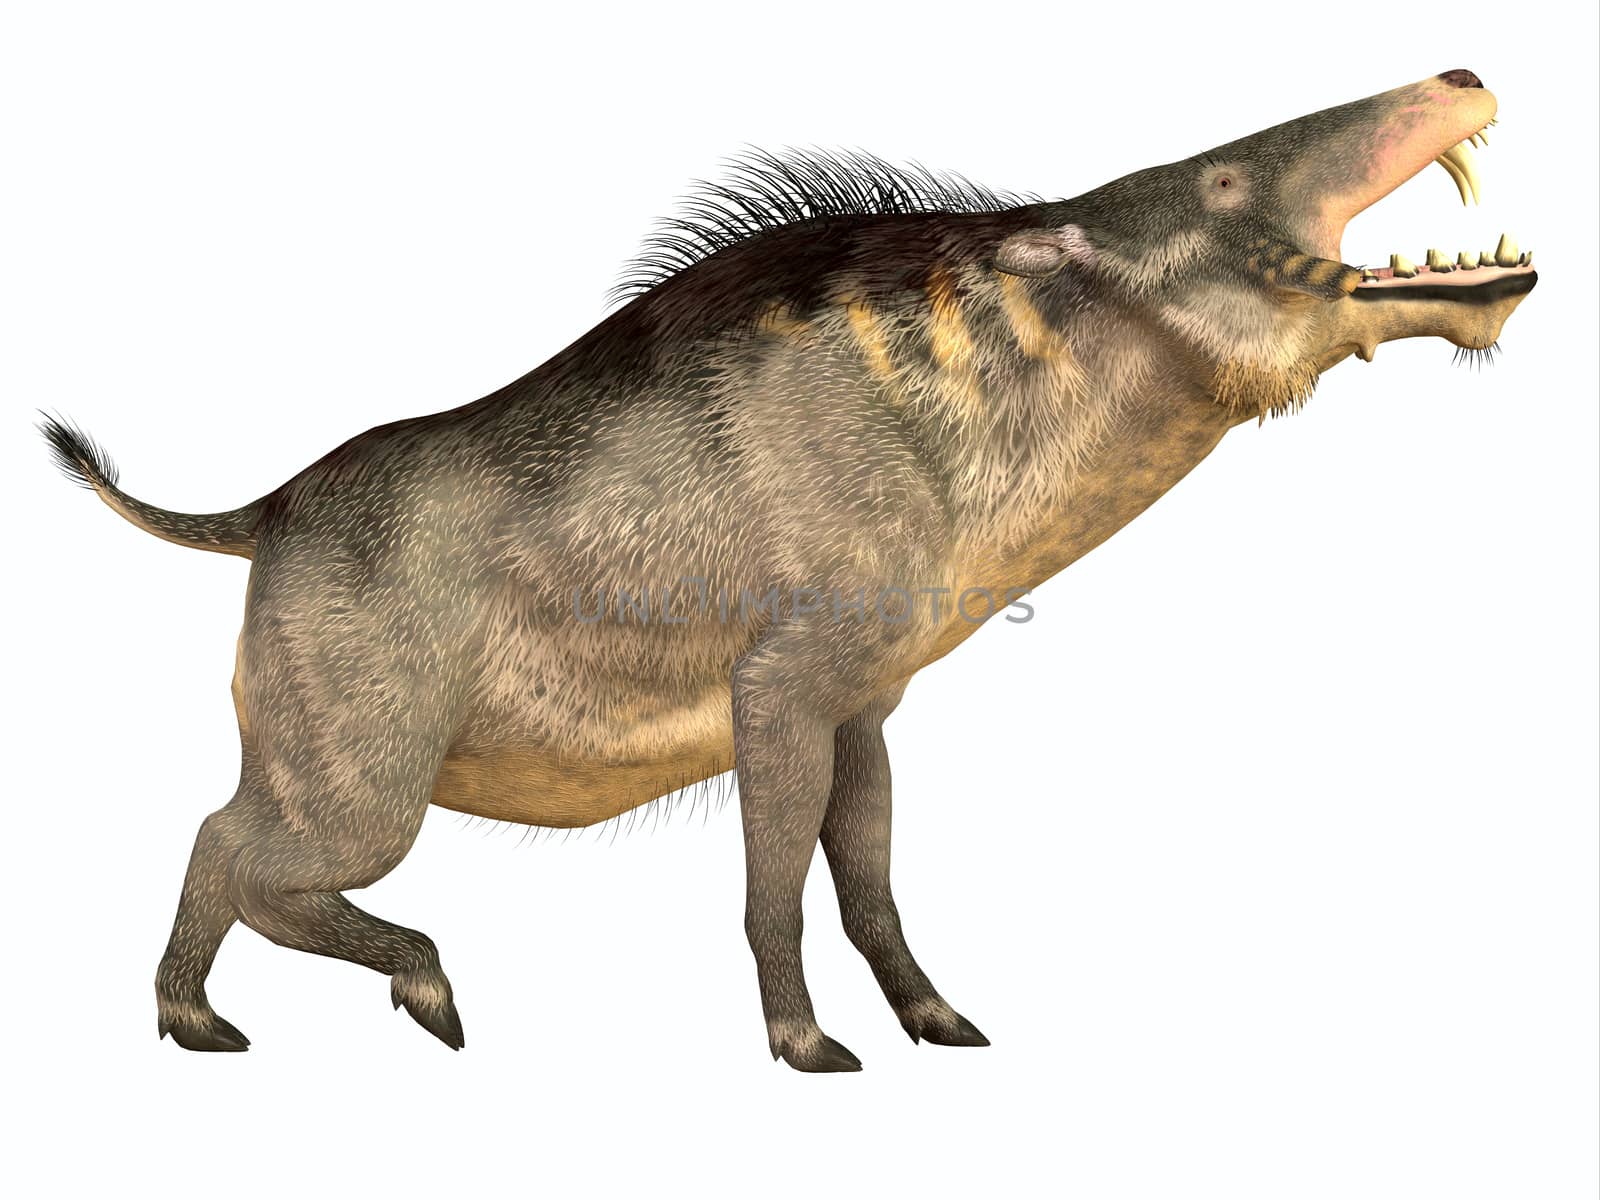 Entelodon was an omnivorous pig that lived in Europe and Asia in the Eocene through the Oligocene Periods.